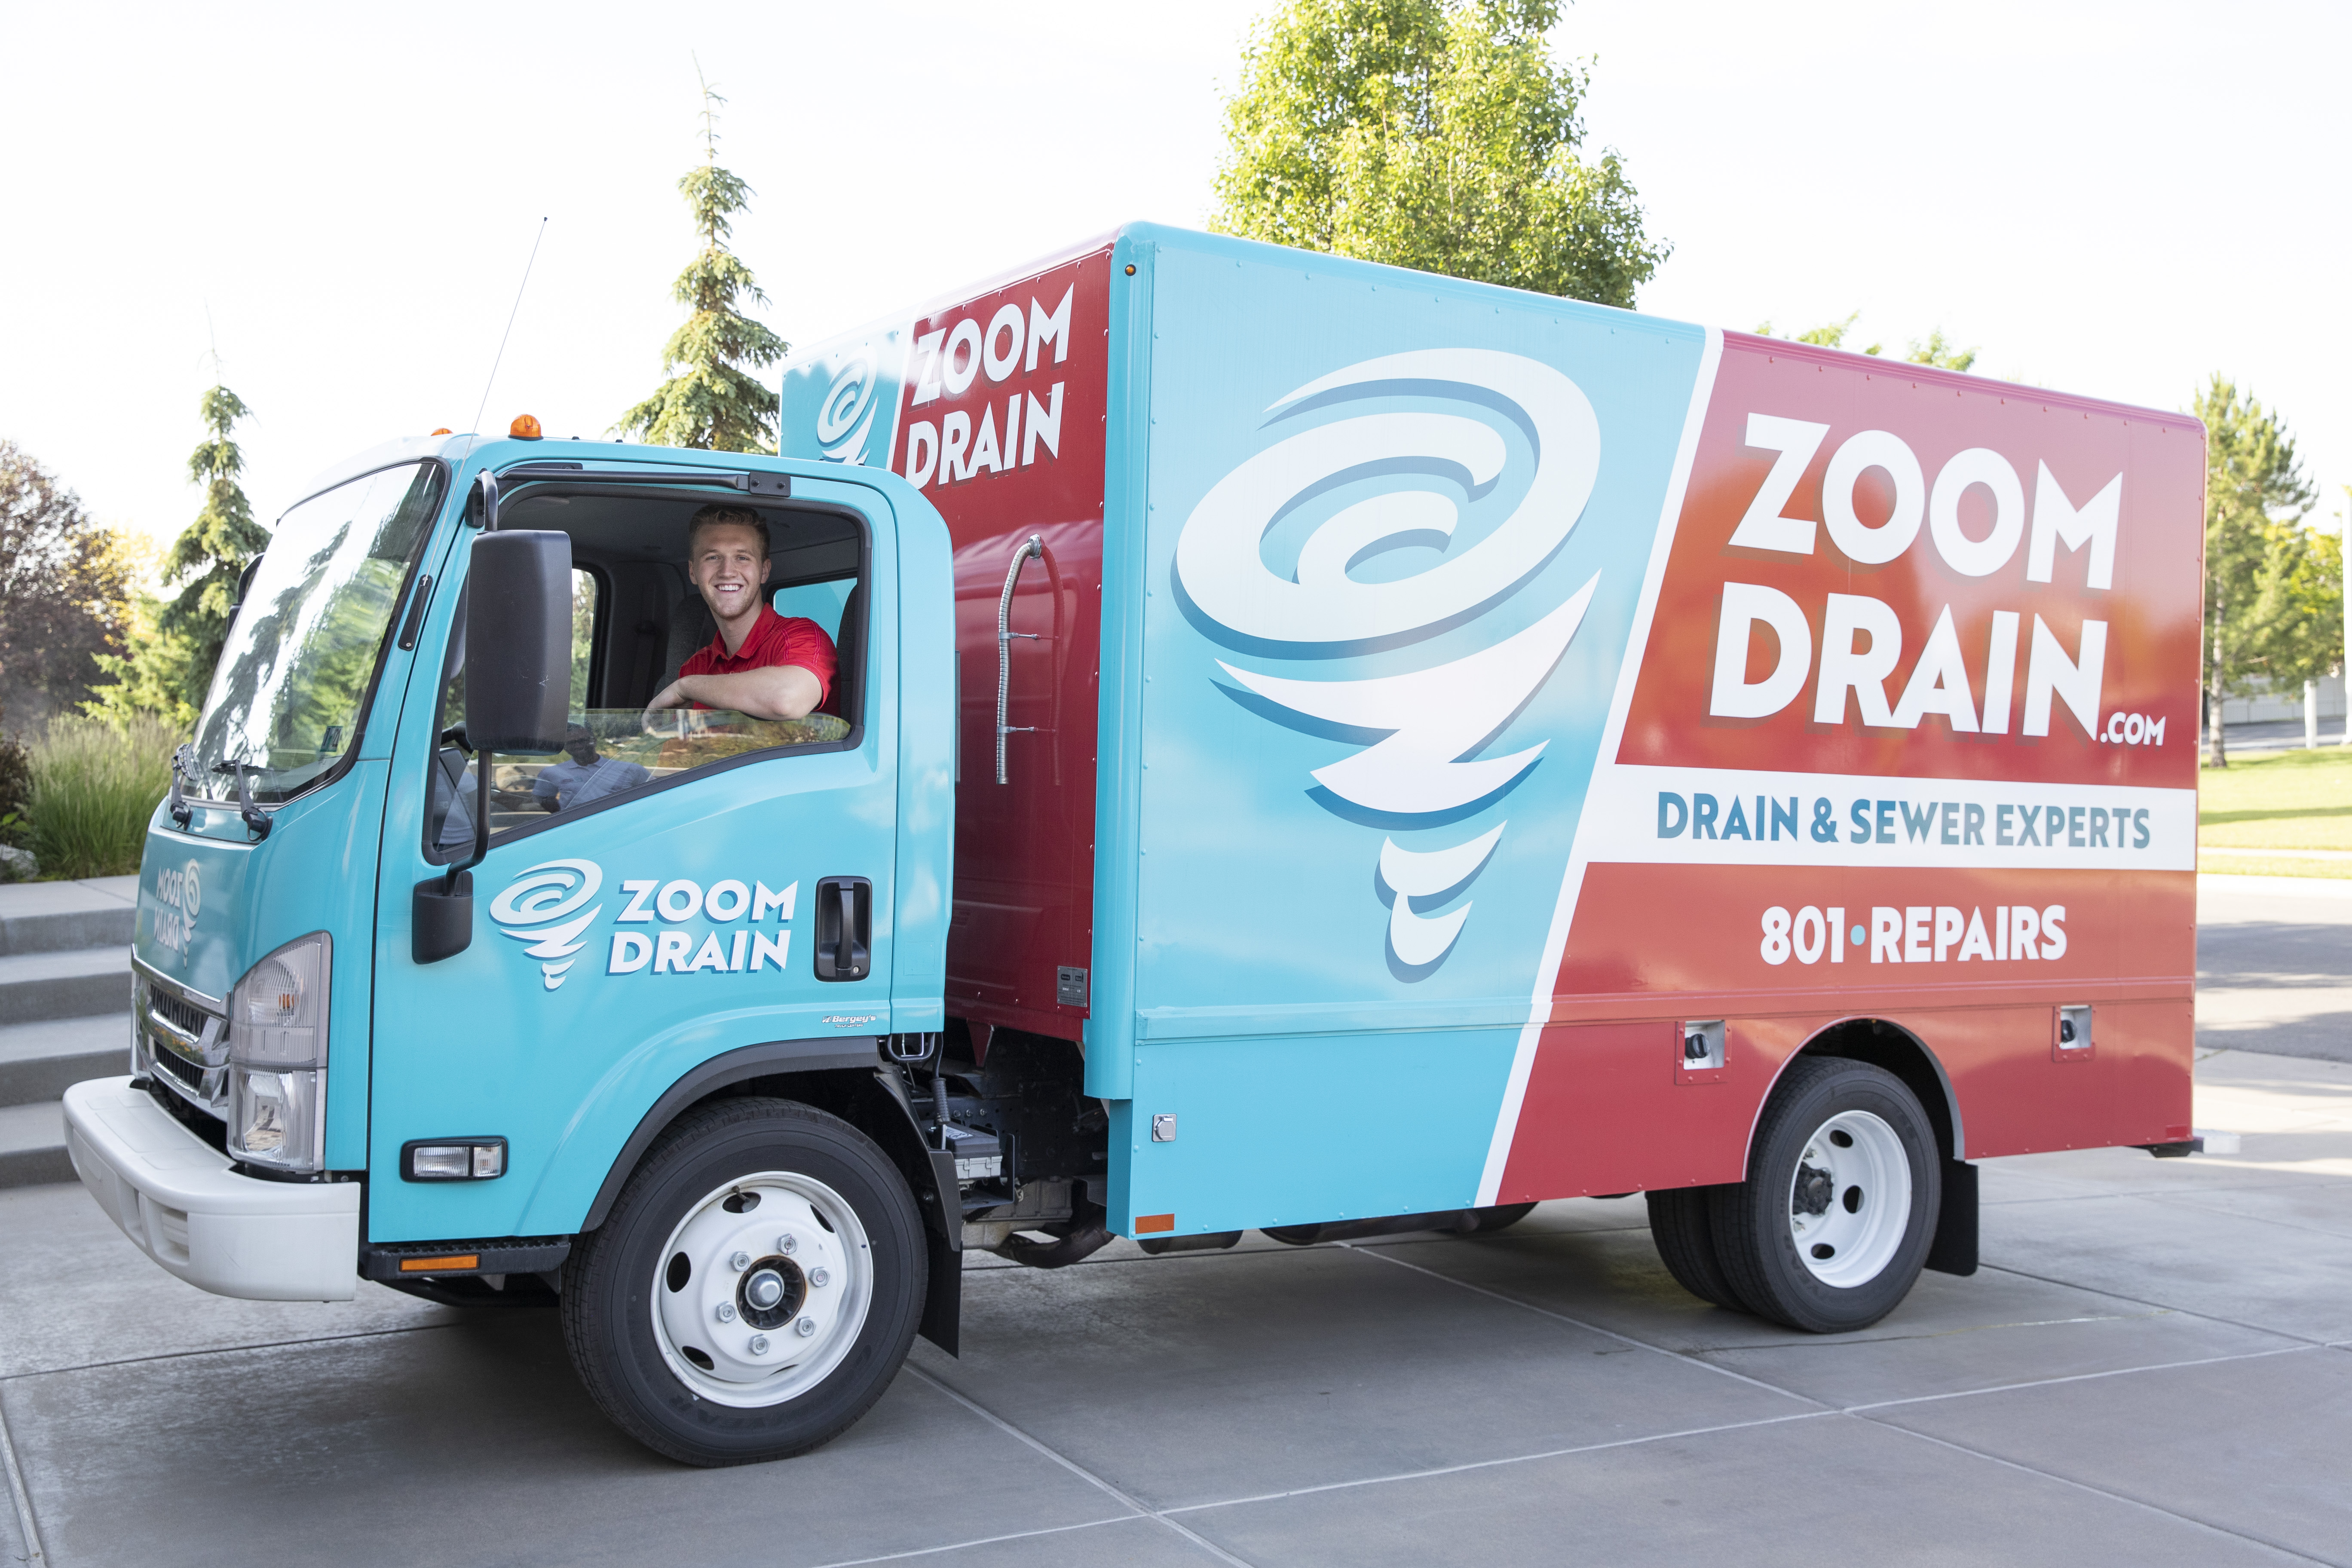 Several Fun Facts You Might Not Have Known About Zoom Drain's Trucks